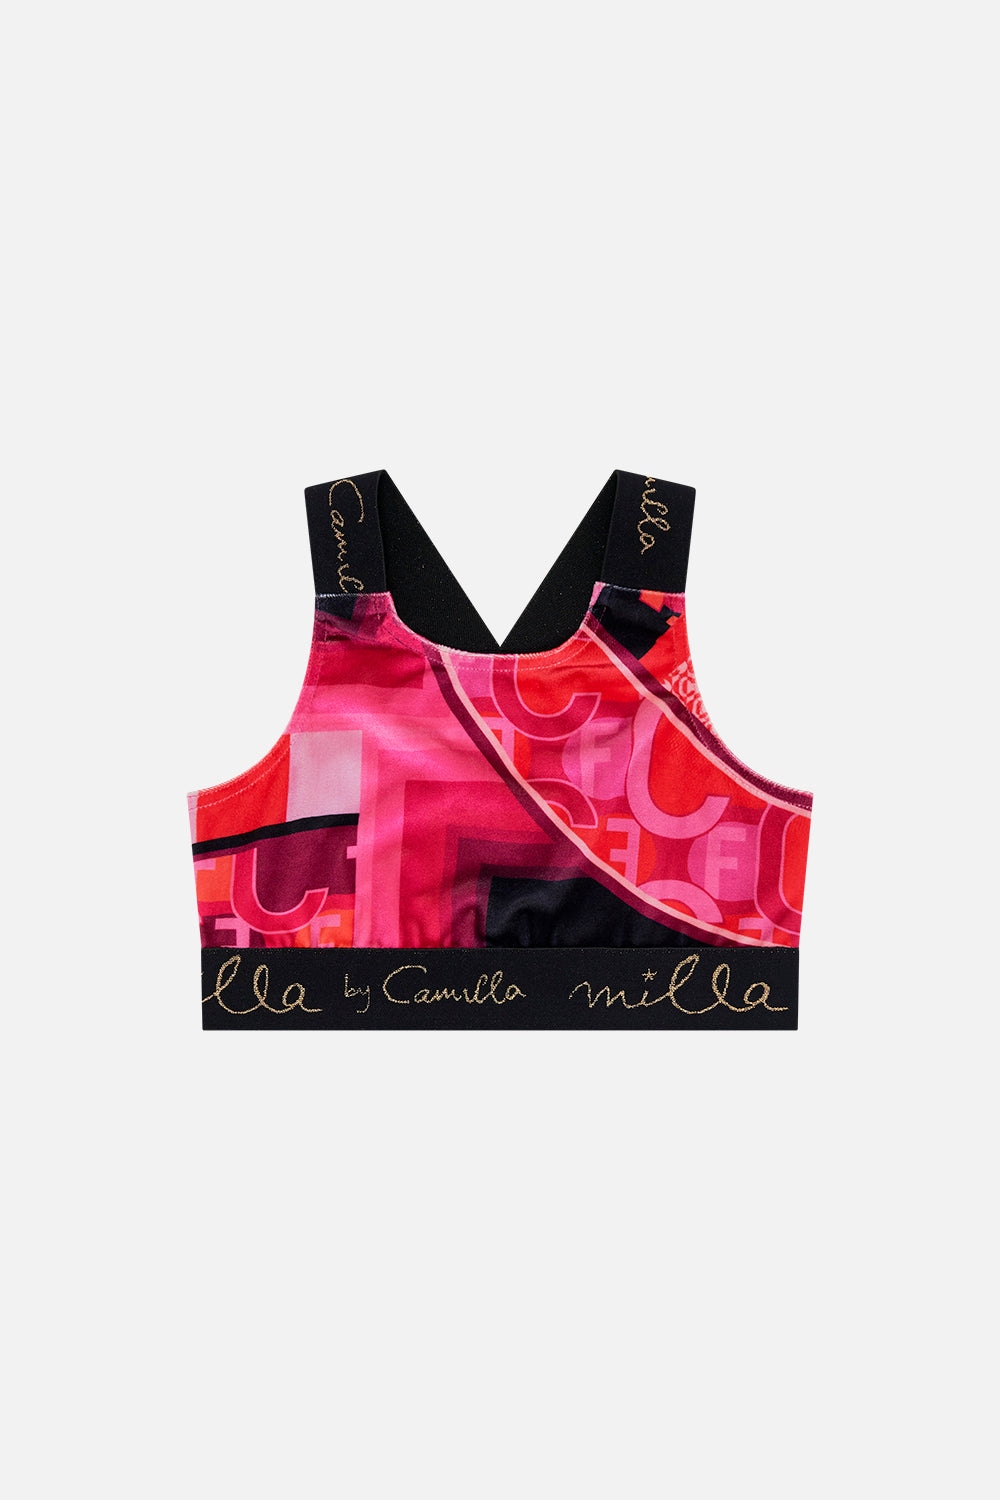 Product view of MILLA by CAMILLA kids sports crop top in Ciao Palazzo orint